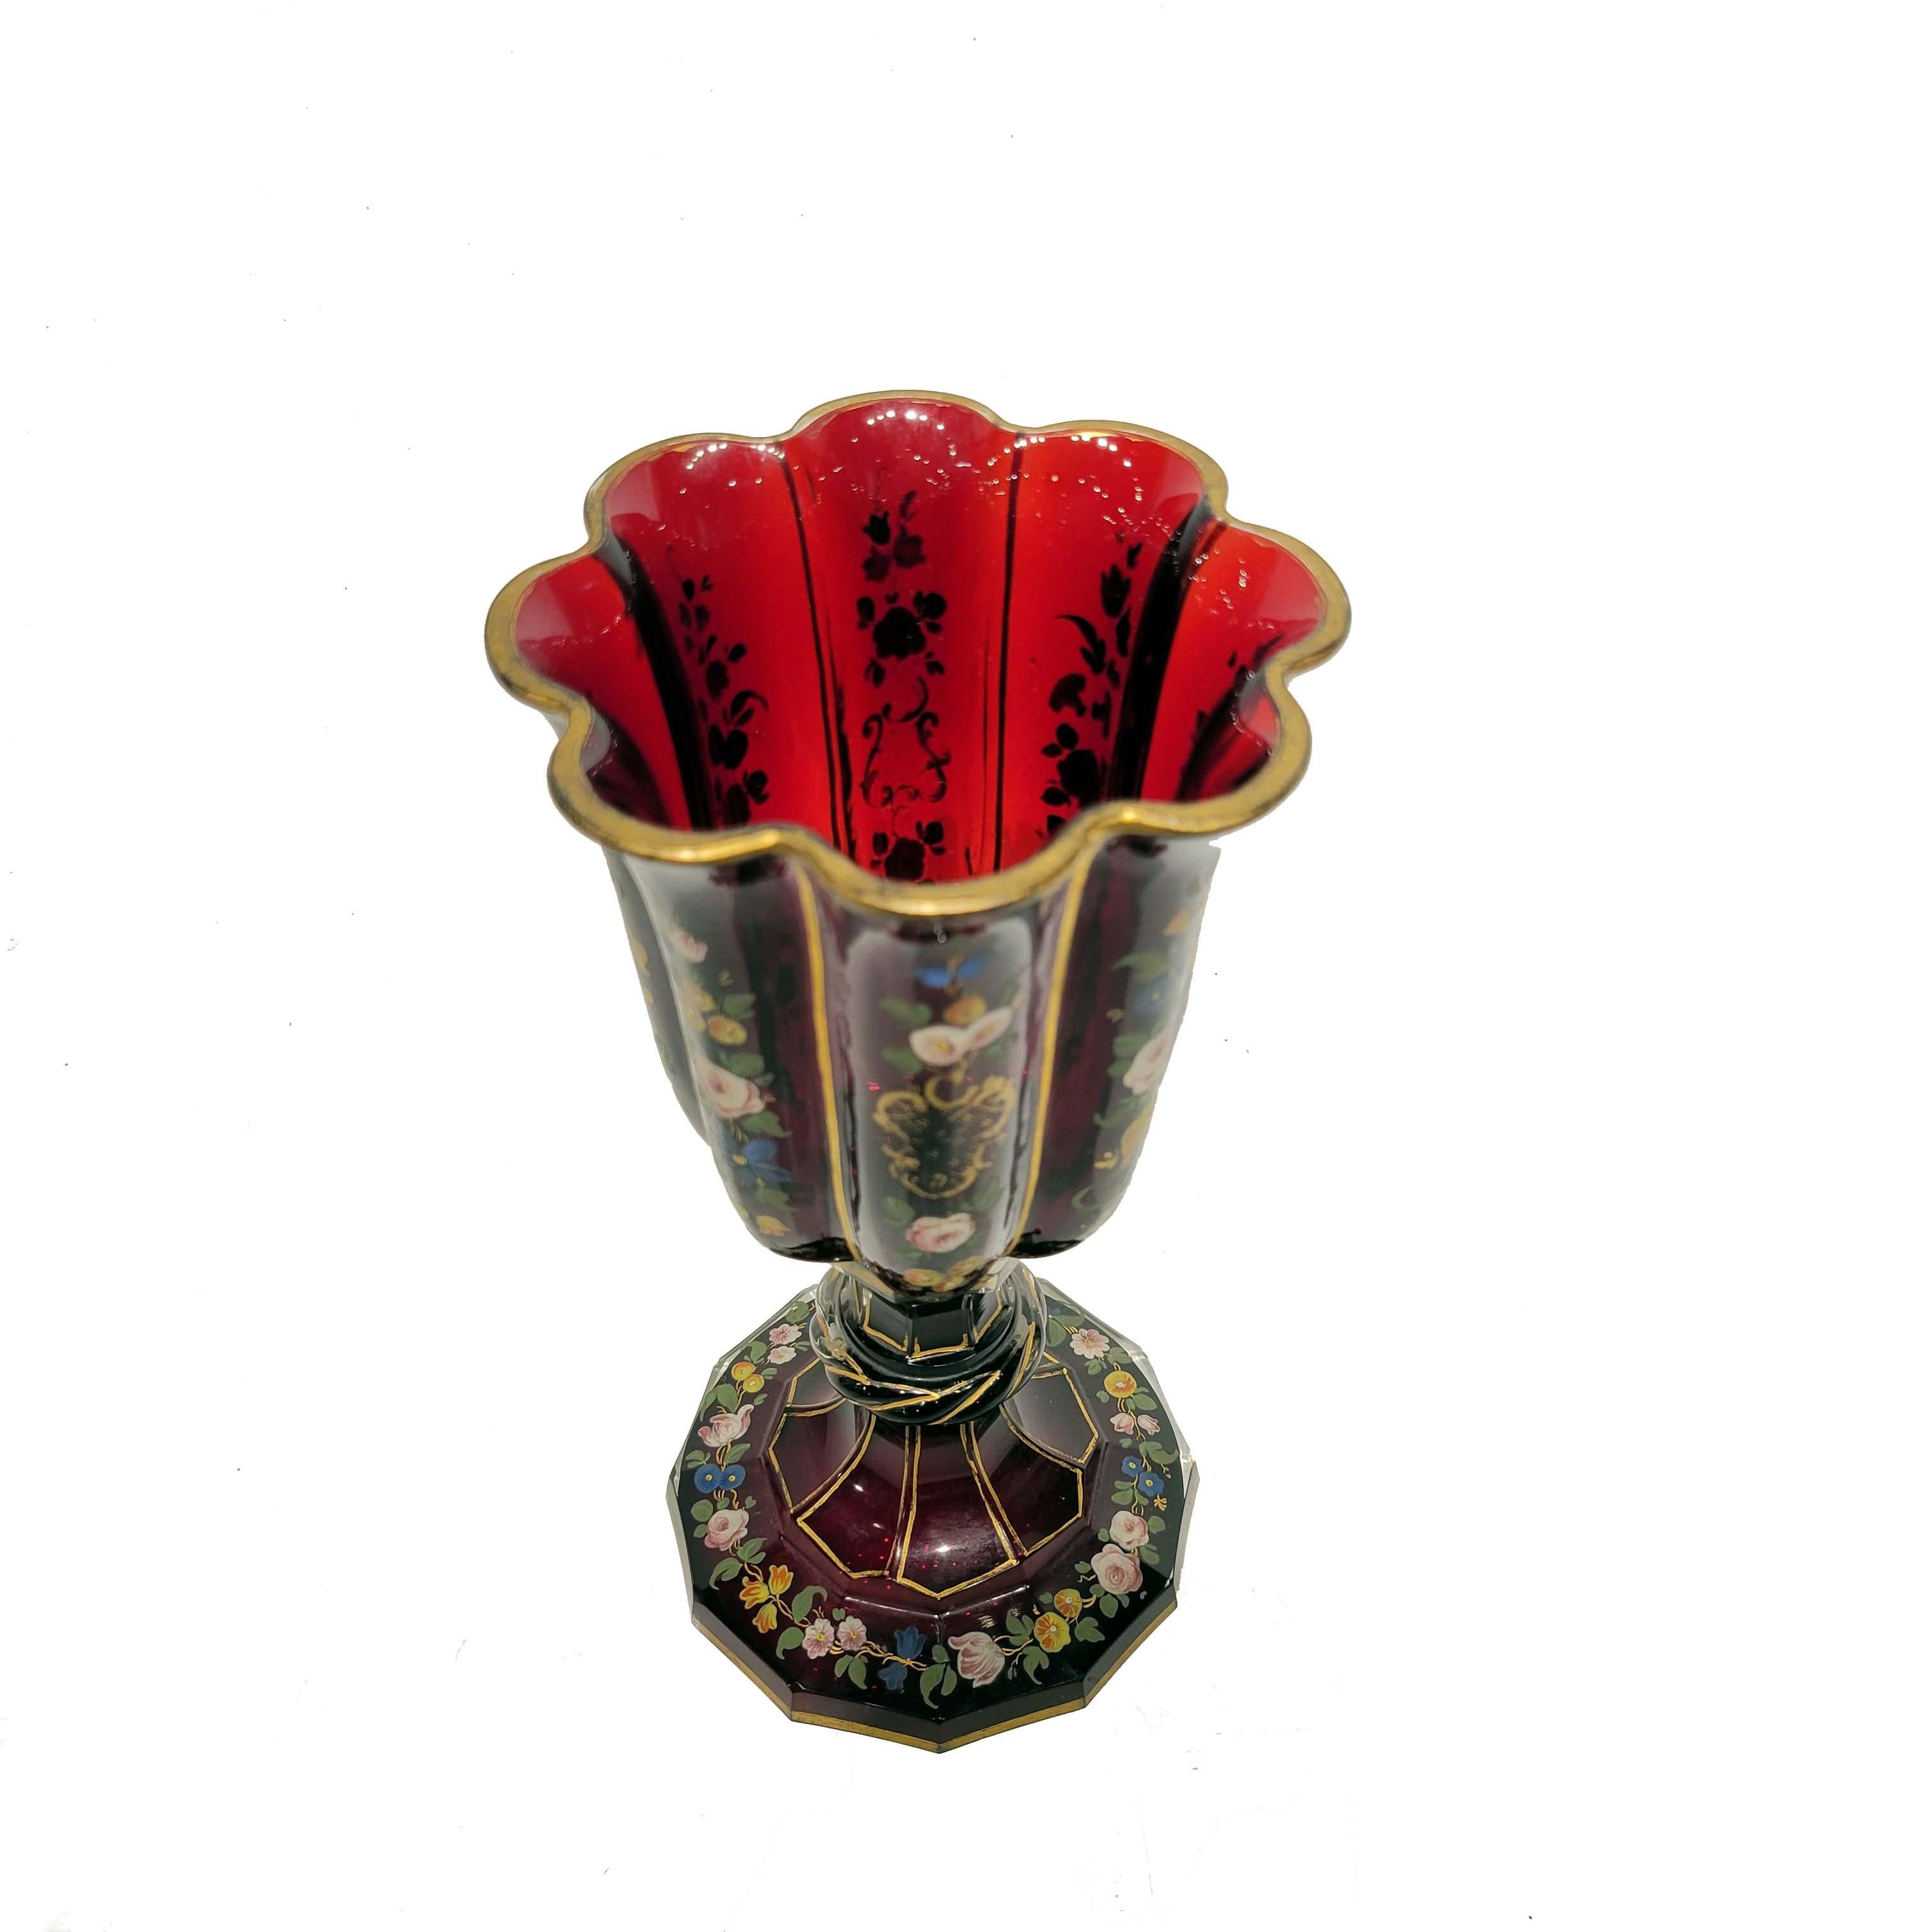 A wonderful rare and quite large Bohemian ruby red footed goblet circa late 19th century. Hand painted enamel flowers and gold decoration. The glass is a rich ruby red color which has been hand blown and hand polished to perfection. This goblet was